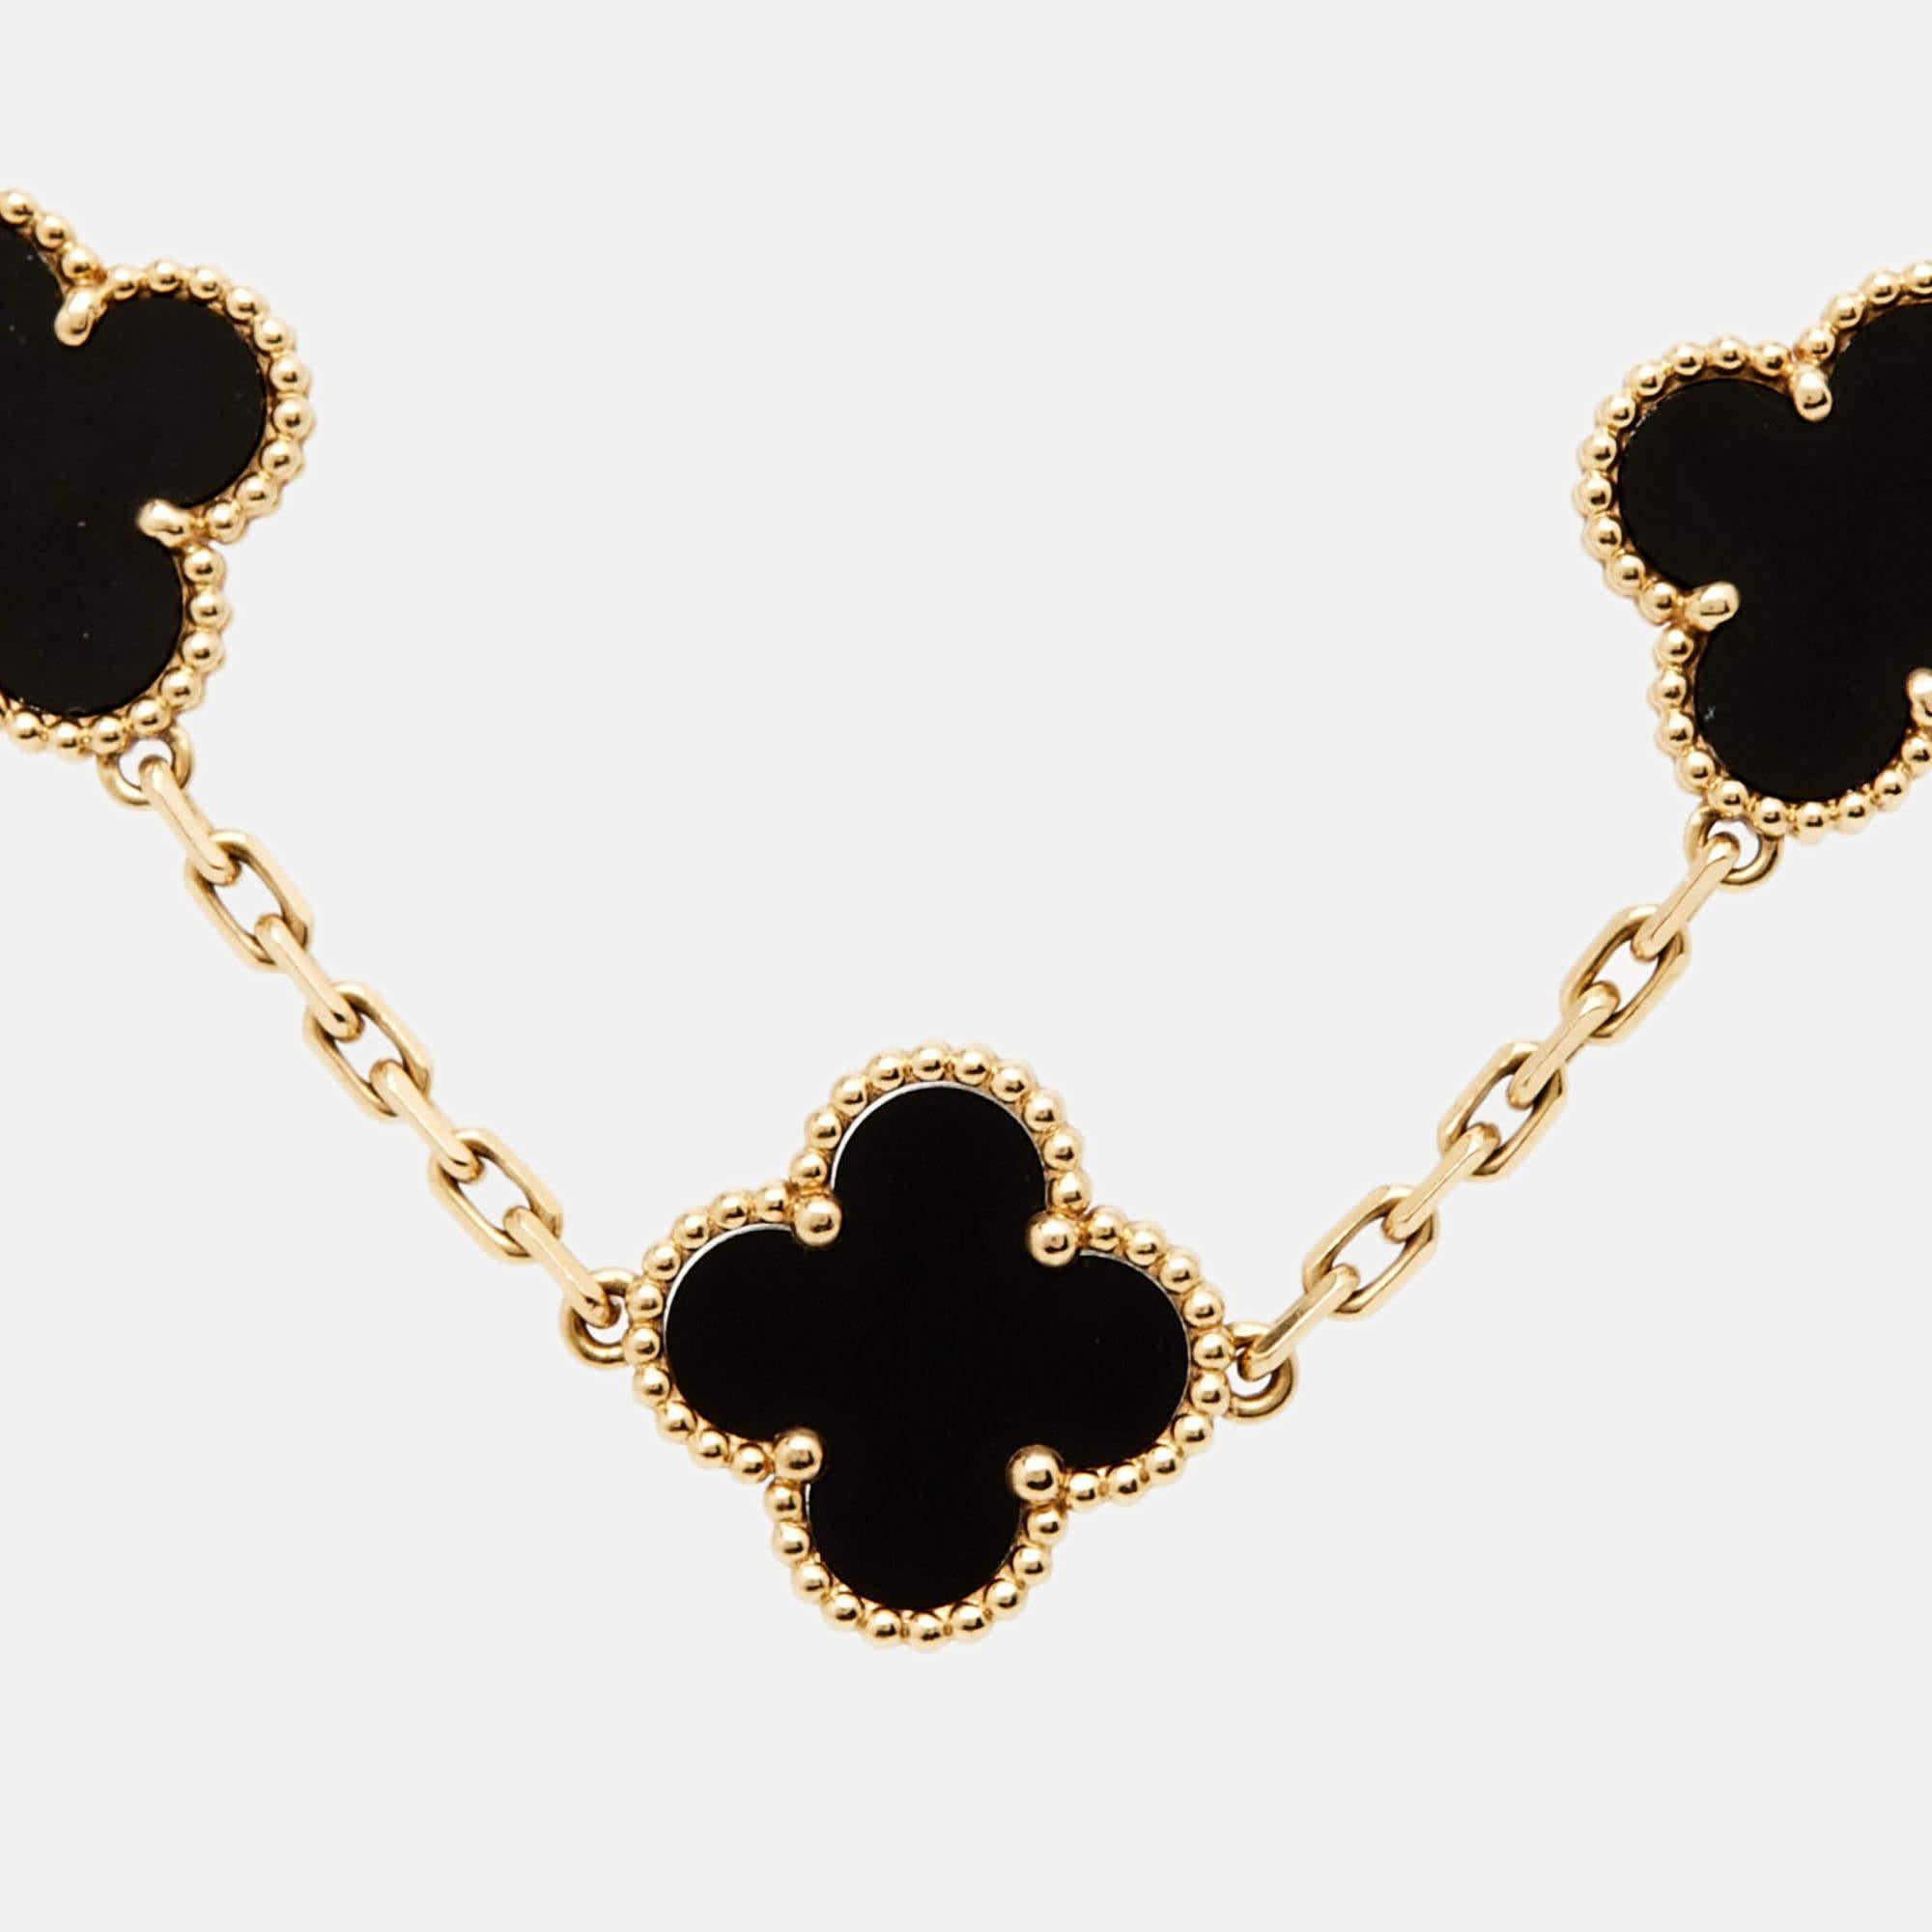 Crafted by Van Cleef & Arpels, the Vintage Alhambra bracelet exudes timeless charm. Delicately set with onyx, each motif signifies elegance. A luxurious statement piece, it gracefully adorns the wrist, adding a touch of understated glamour to any